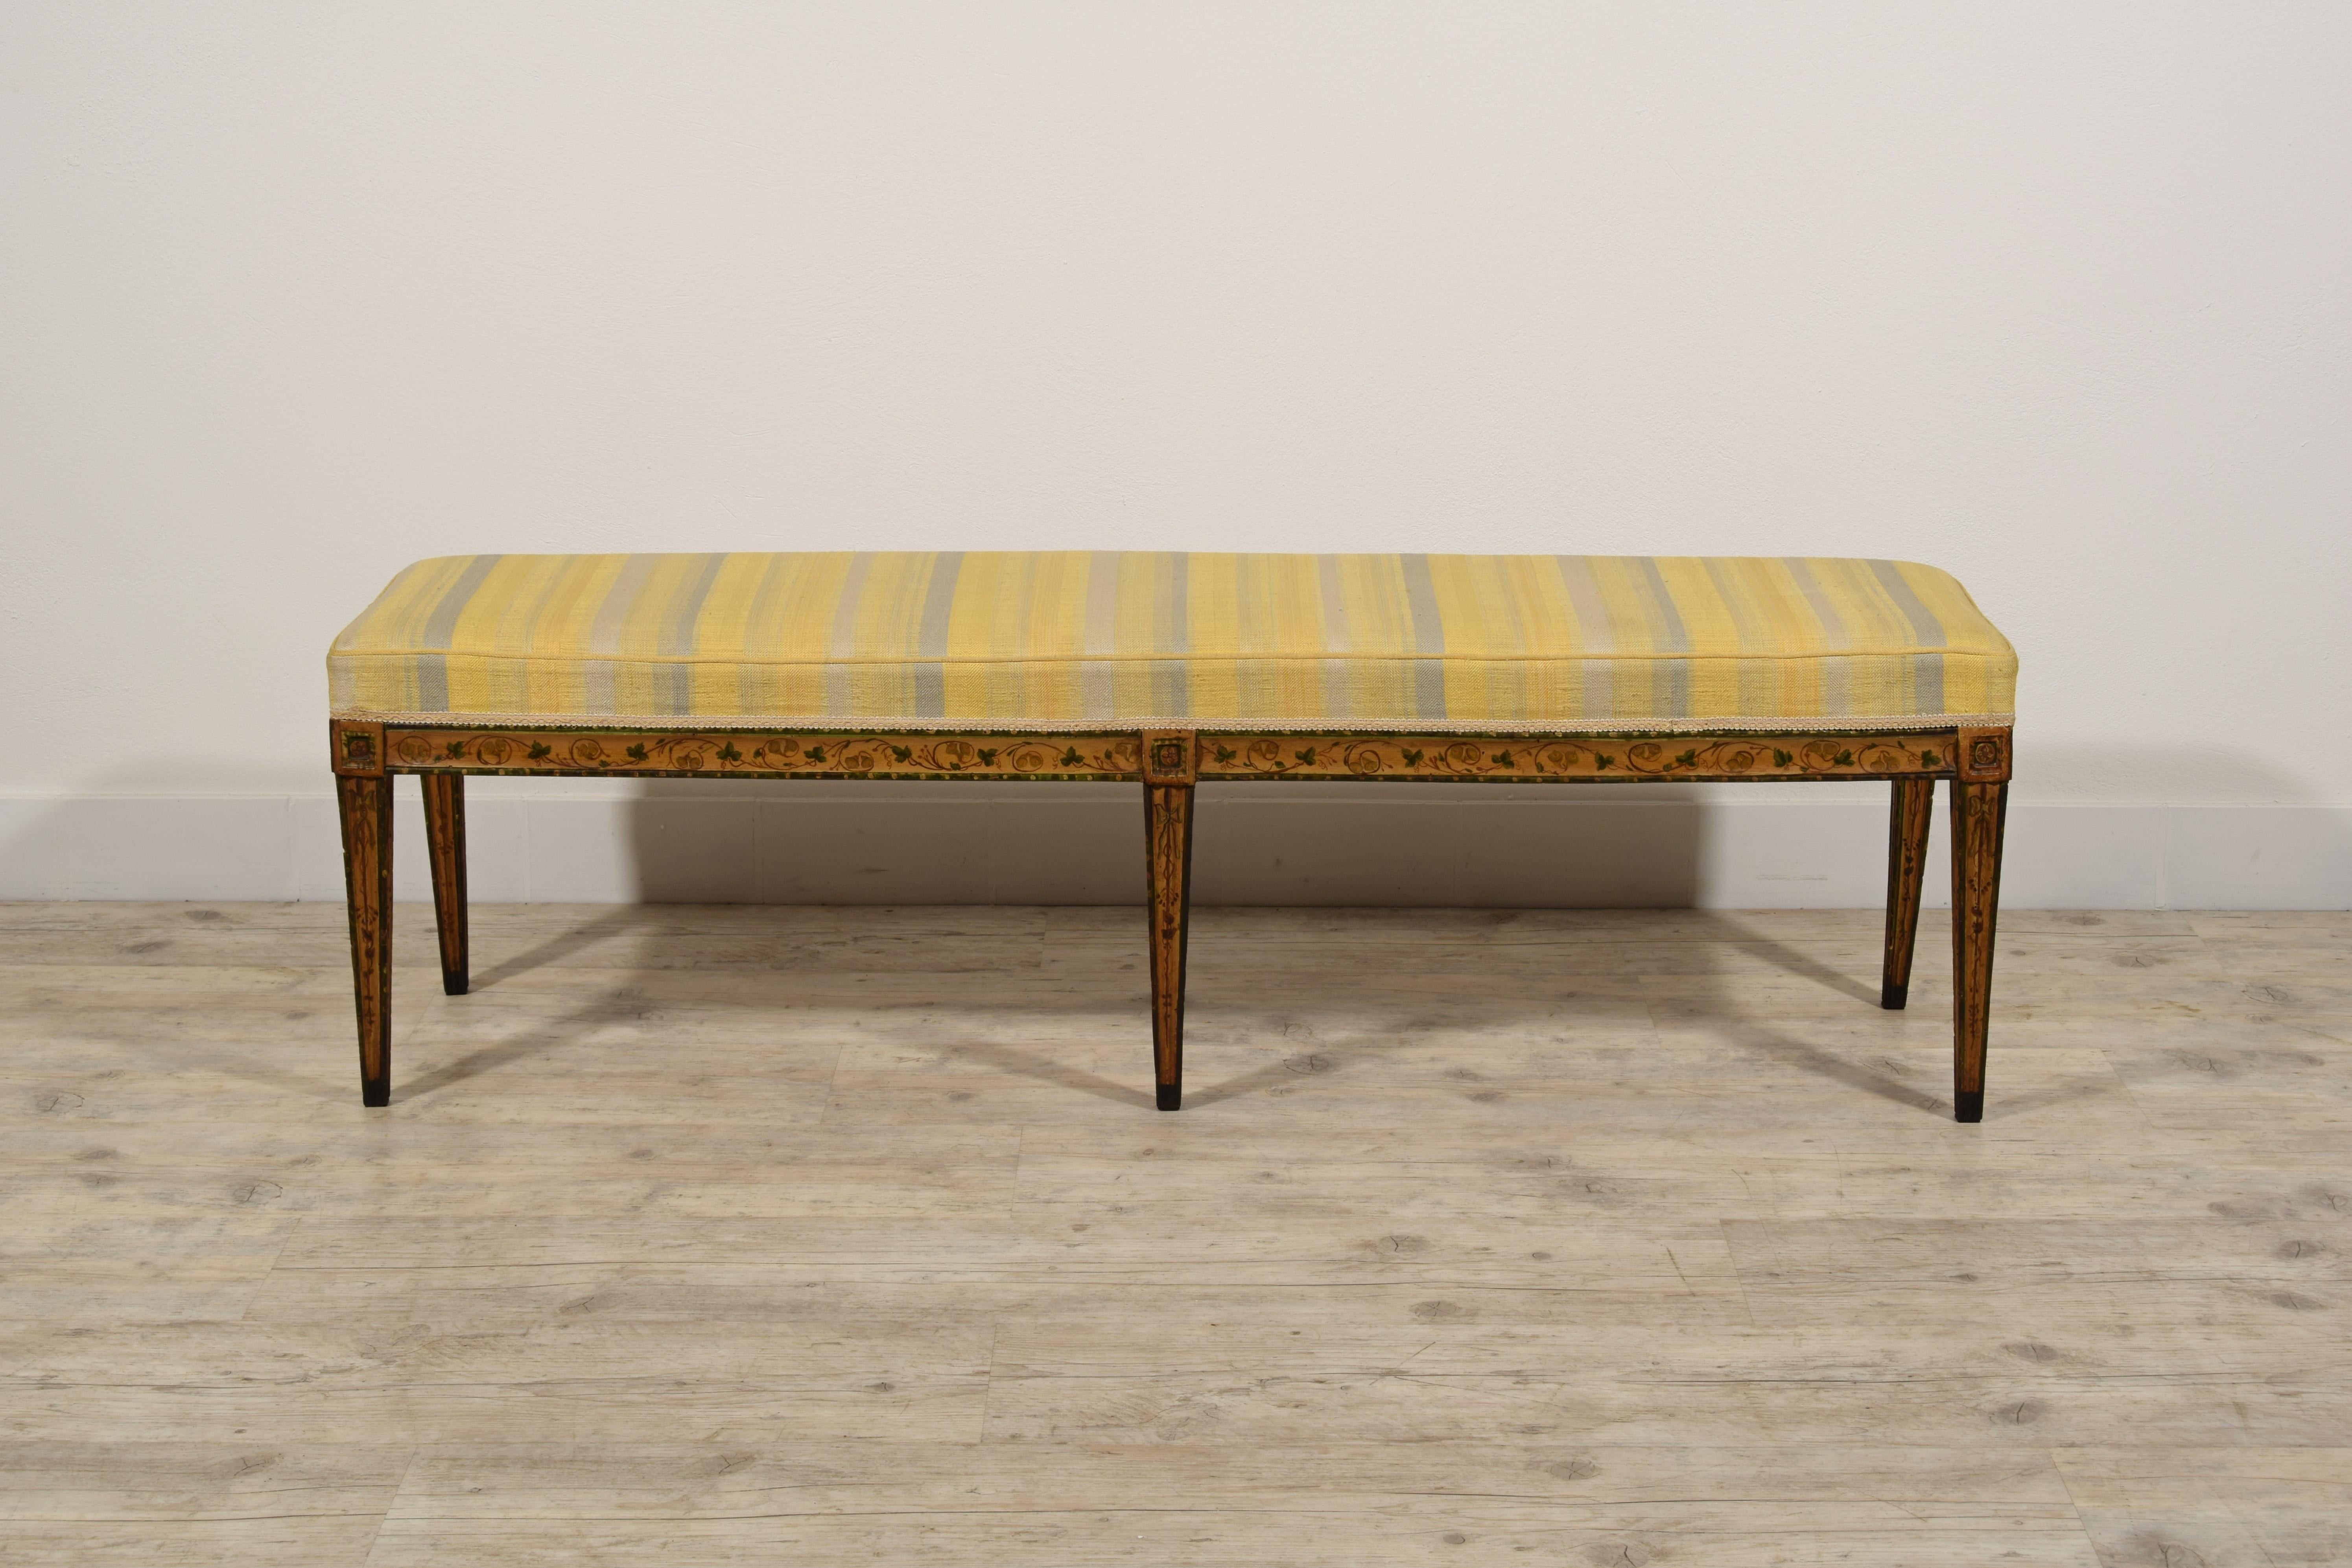 19th Century, Italian Six-legged Centre Bench Lacquered Wood with Ramage Motive 3